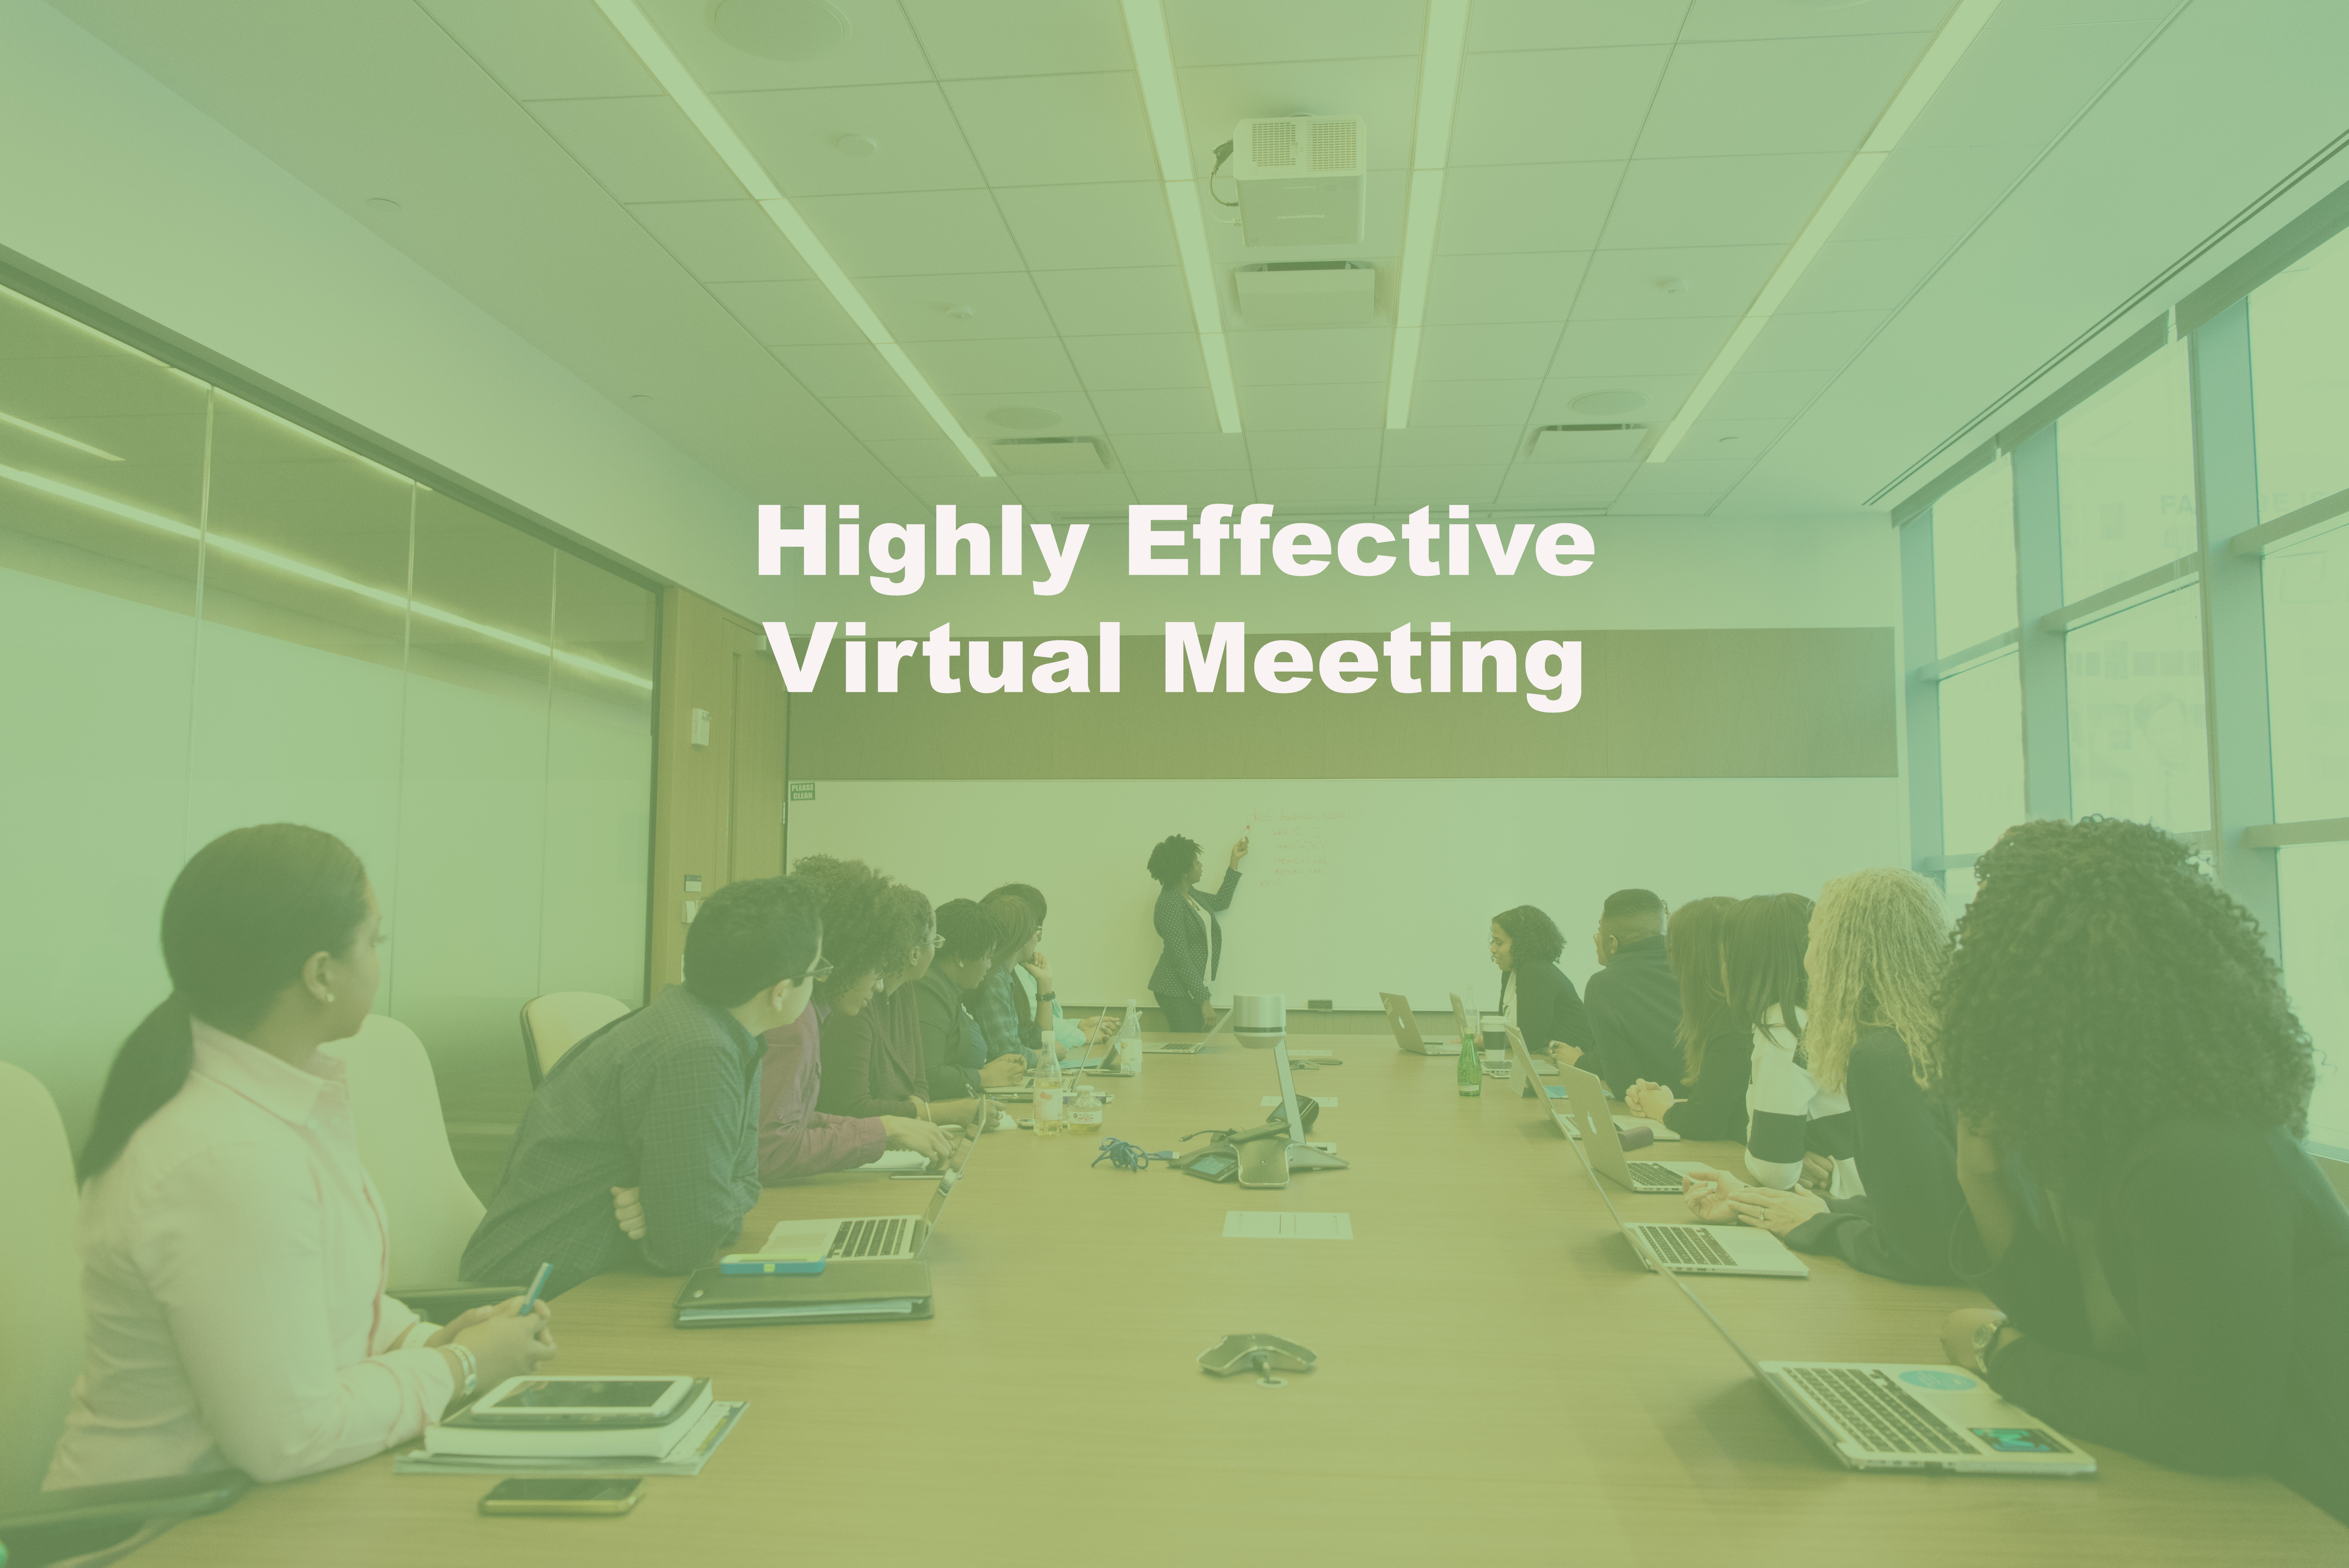 Highly Effective Virtual Meeting